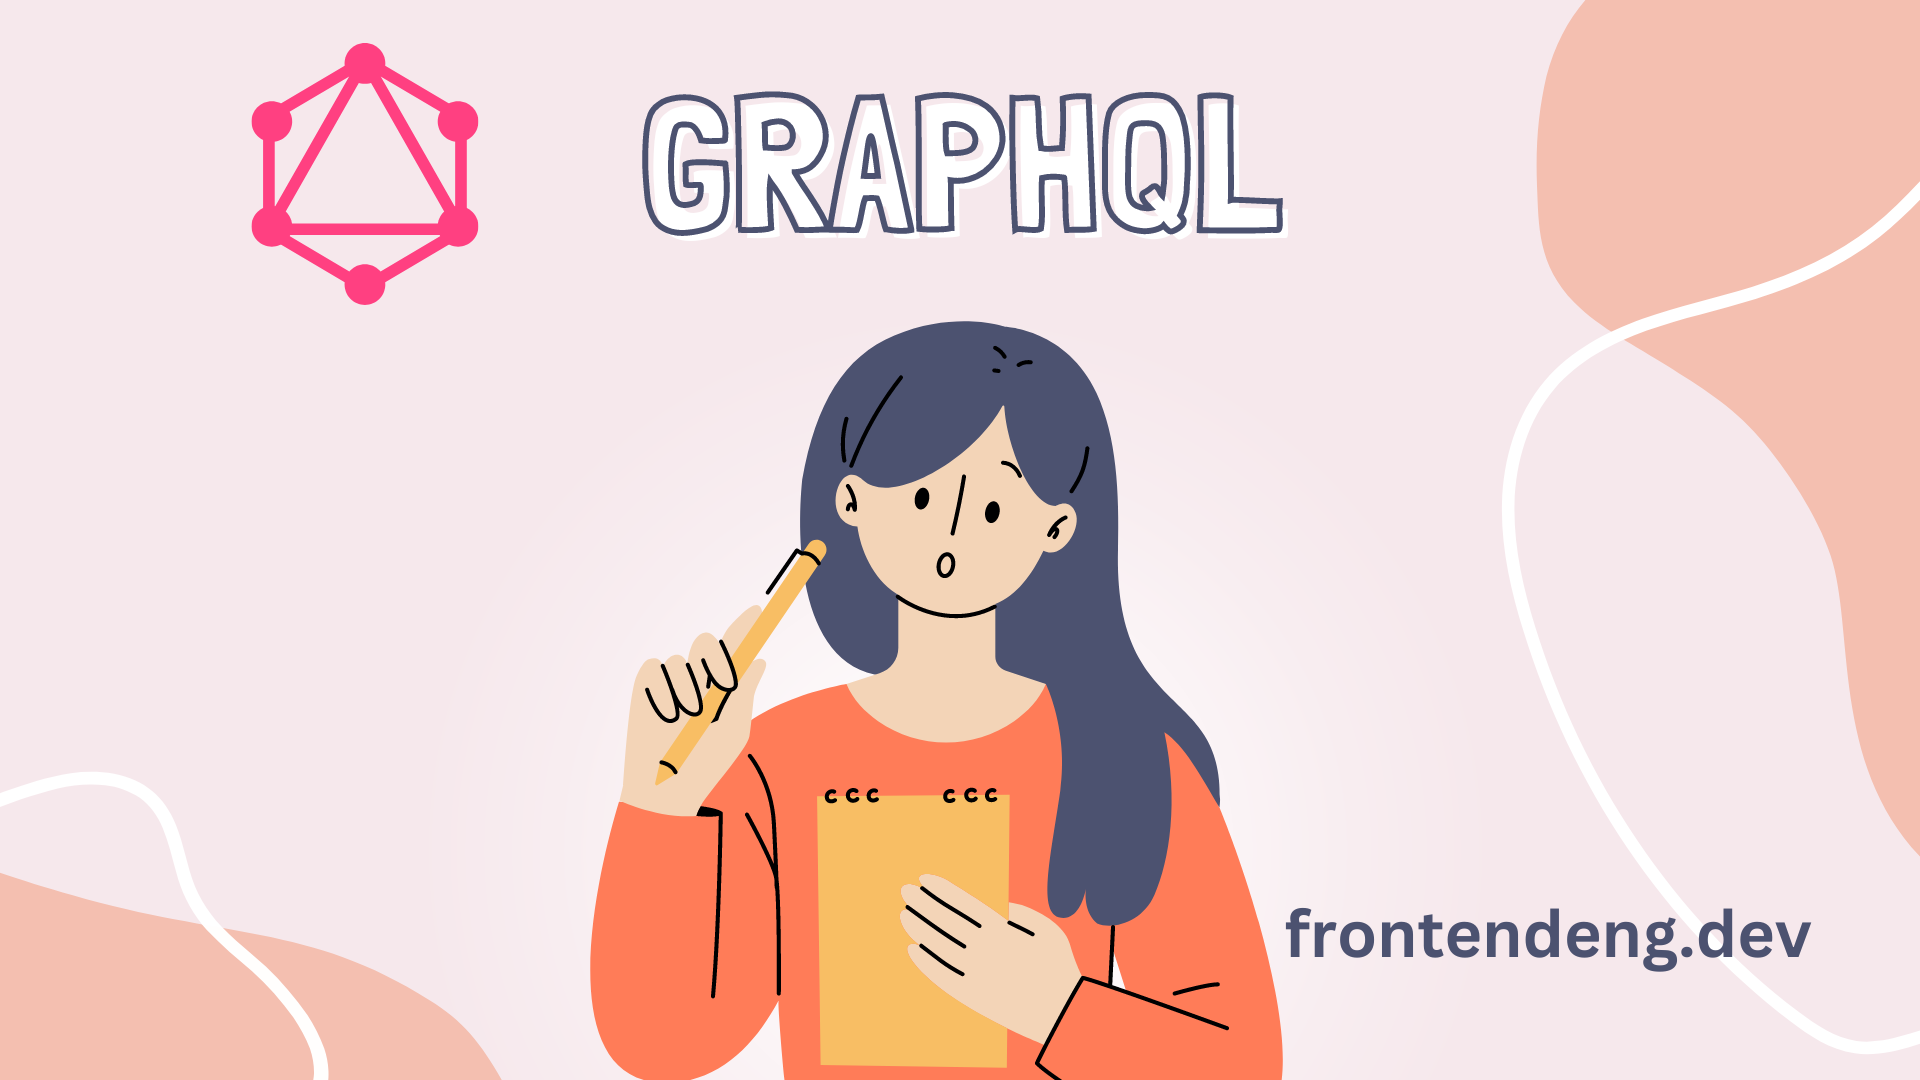 Frontend Engineer's guide to GraphQL